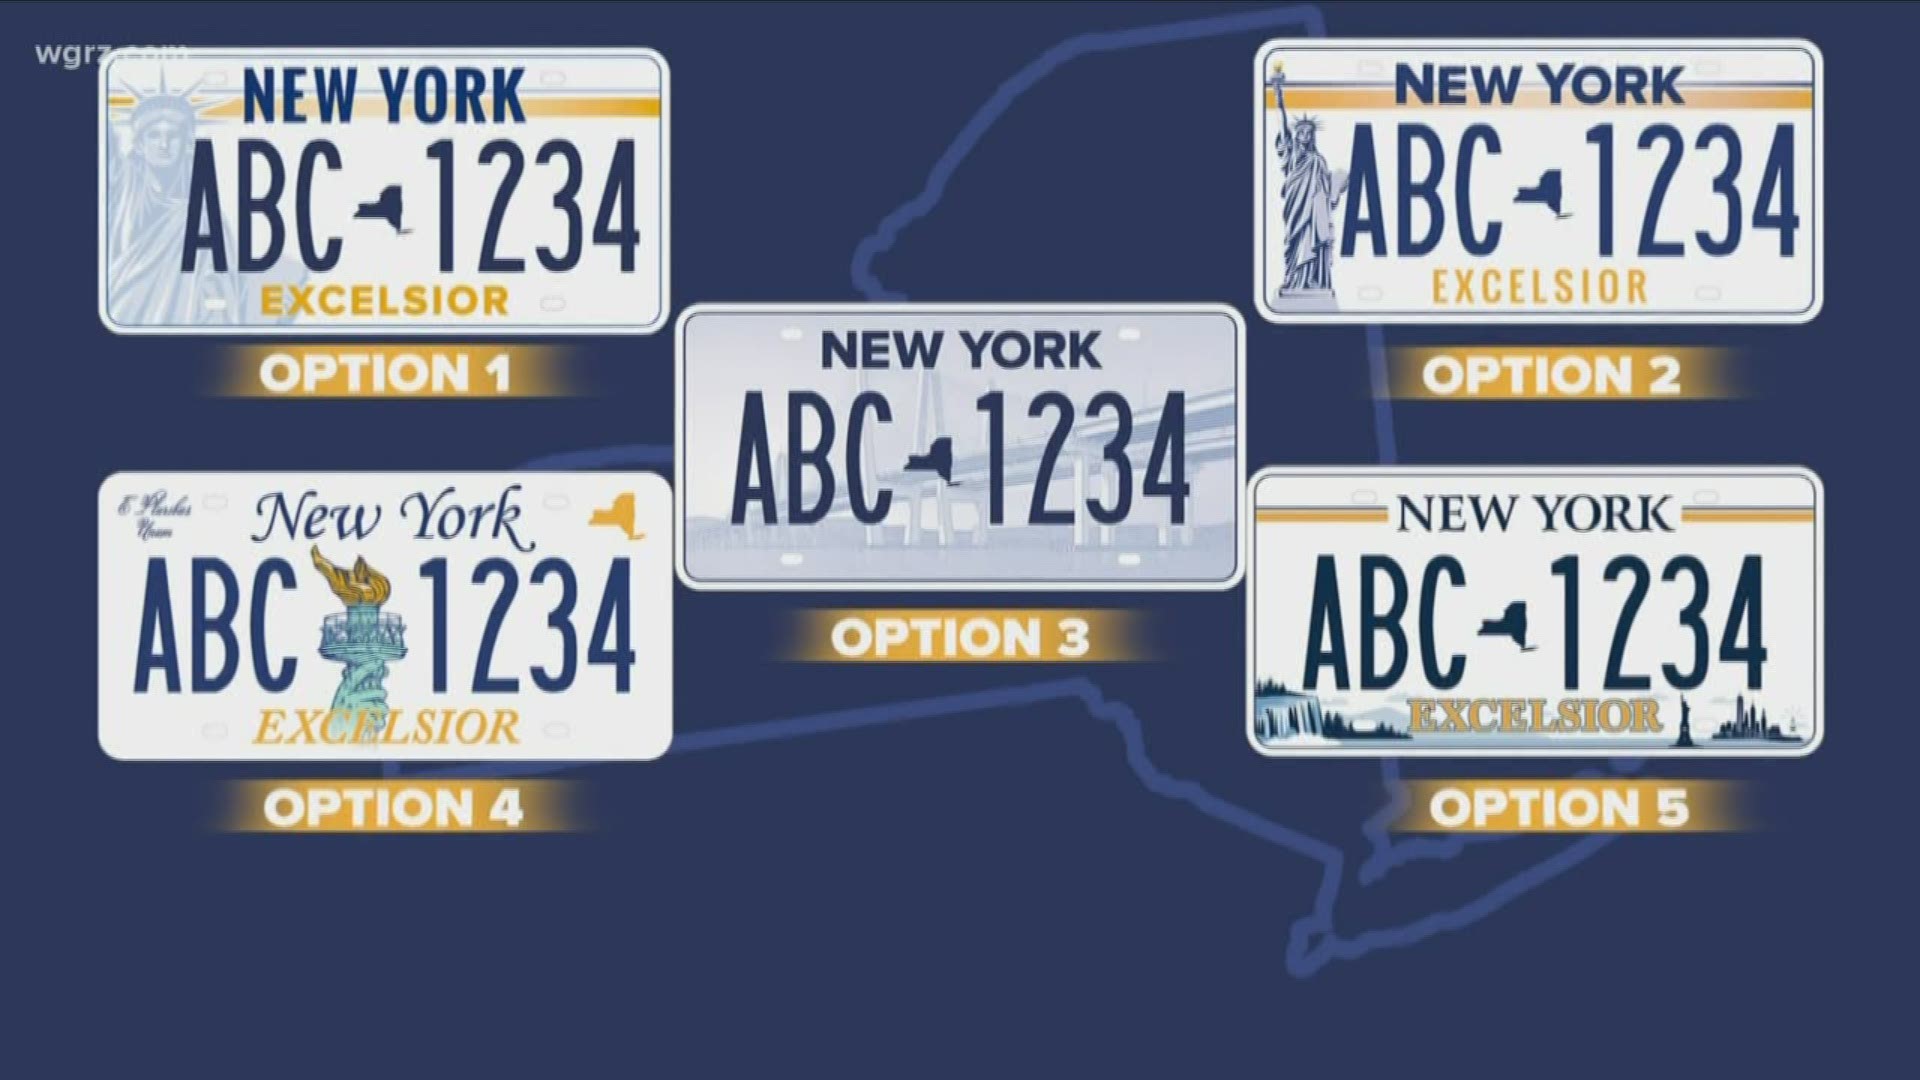 The state has a plan to make everyone eventually get a new license plate over the next 10 years.
Many people are not fans of this plan.